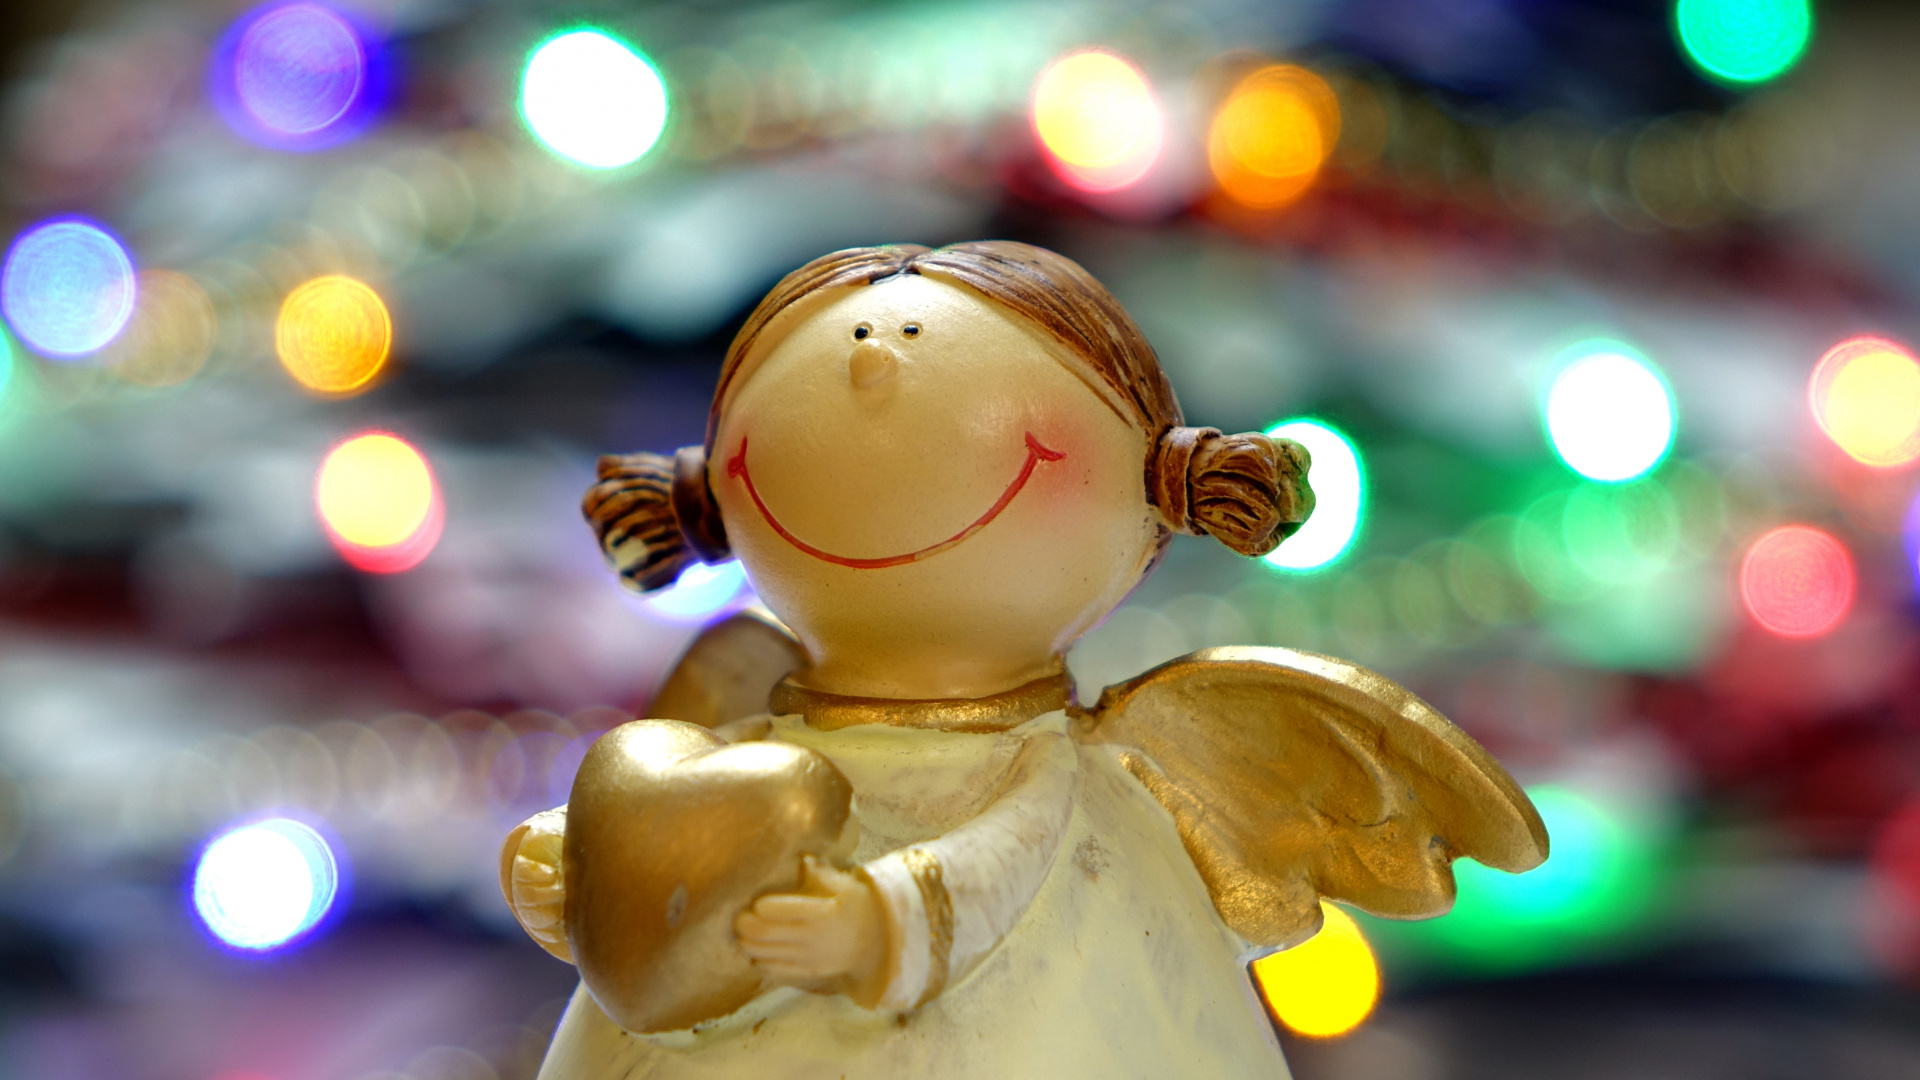 White Angel Ceramic Figurine in Bokeh Photography. Wallpaper in 1920x1080 Resolution